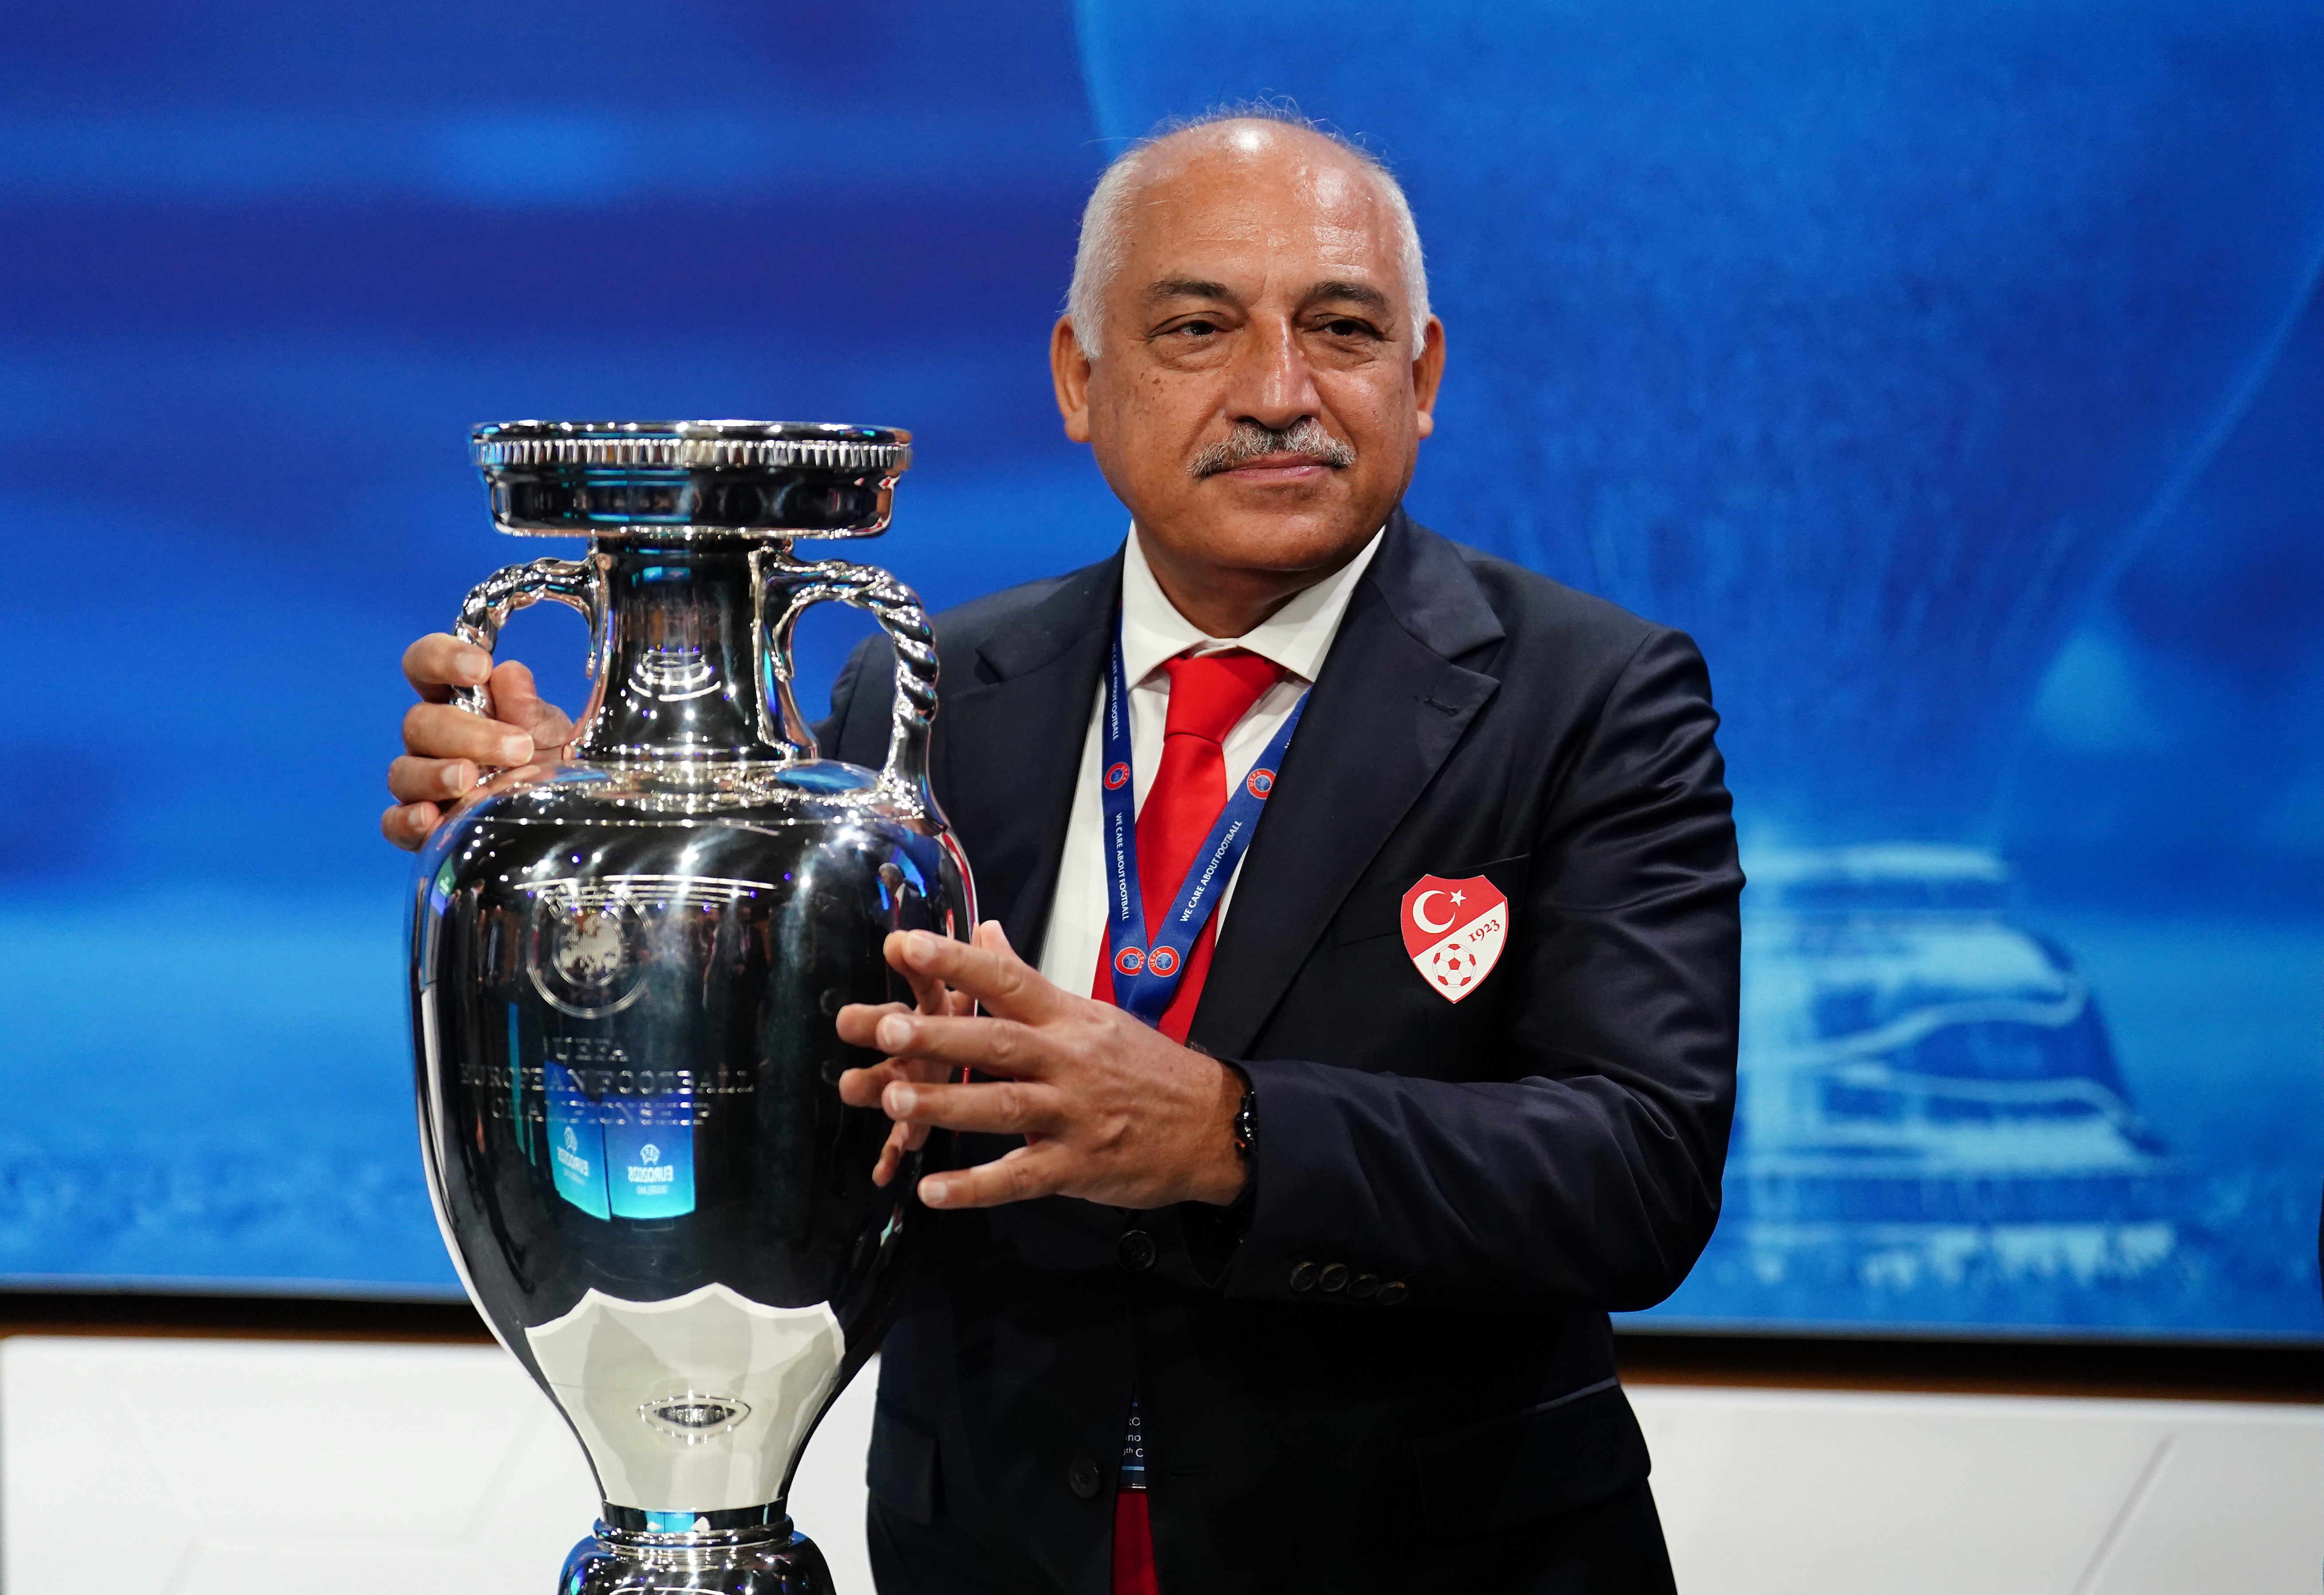 TFF president Mehmet Buyukeksi pictured in Nyon in October after Turkey was awarded joint hosting rights for Euro 2032